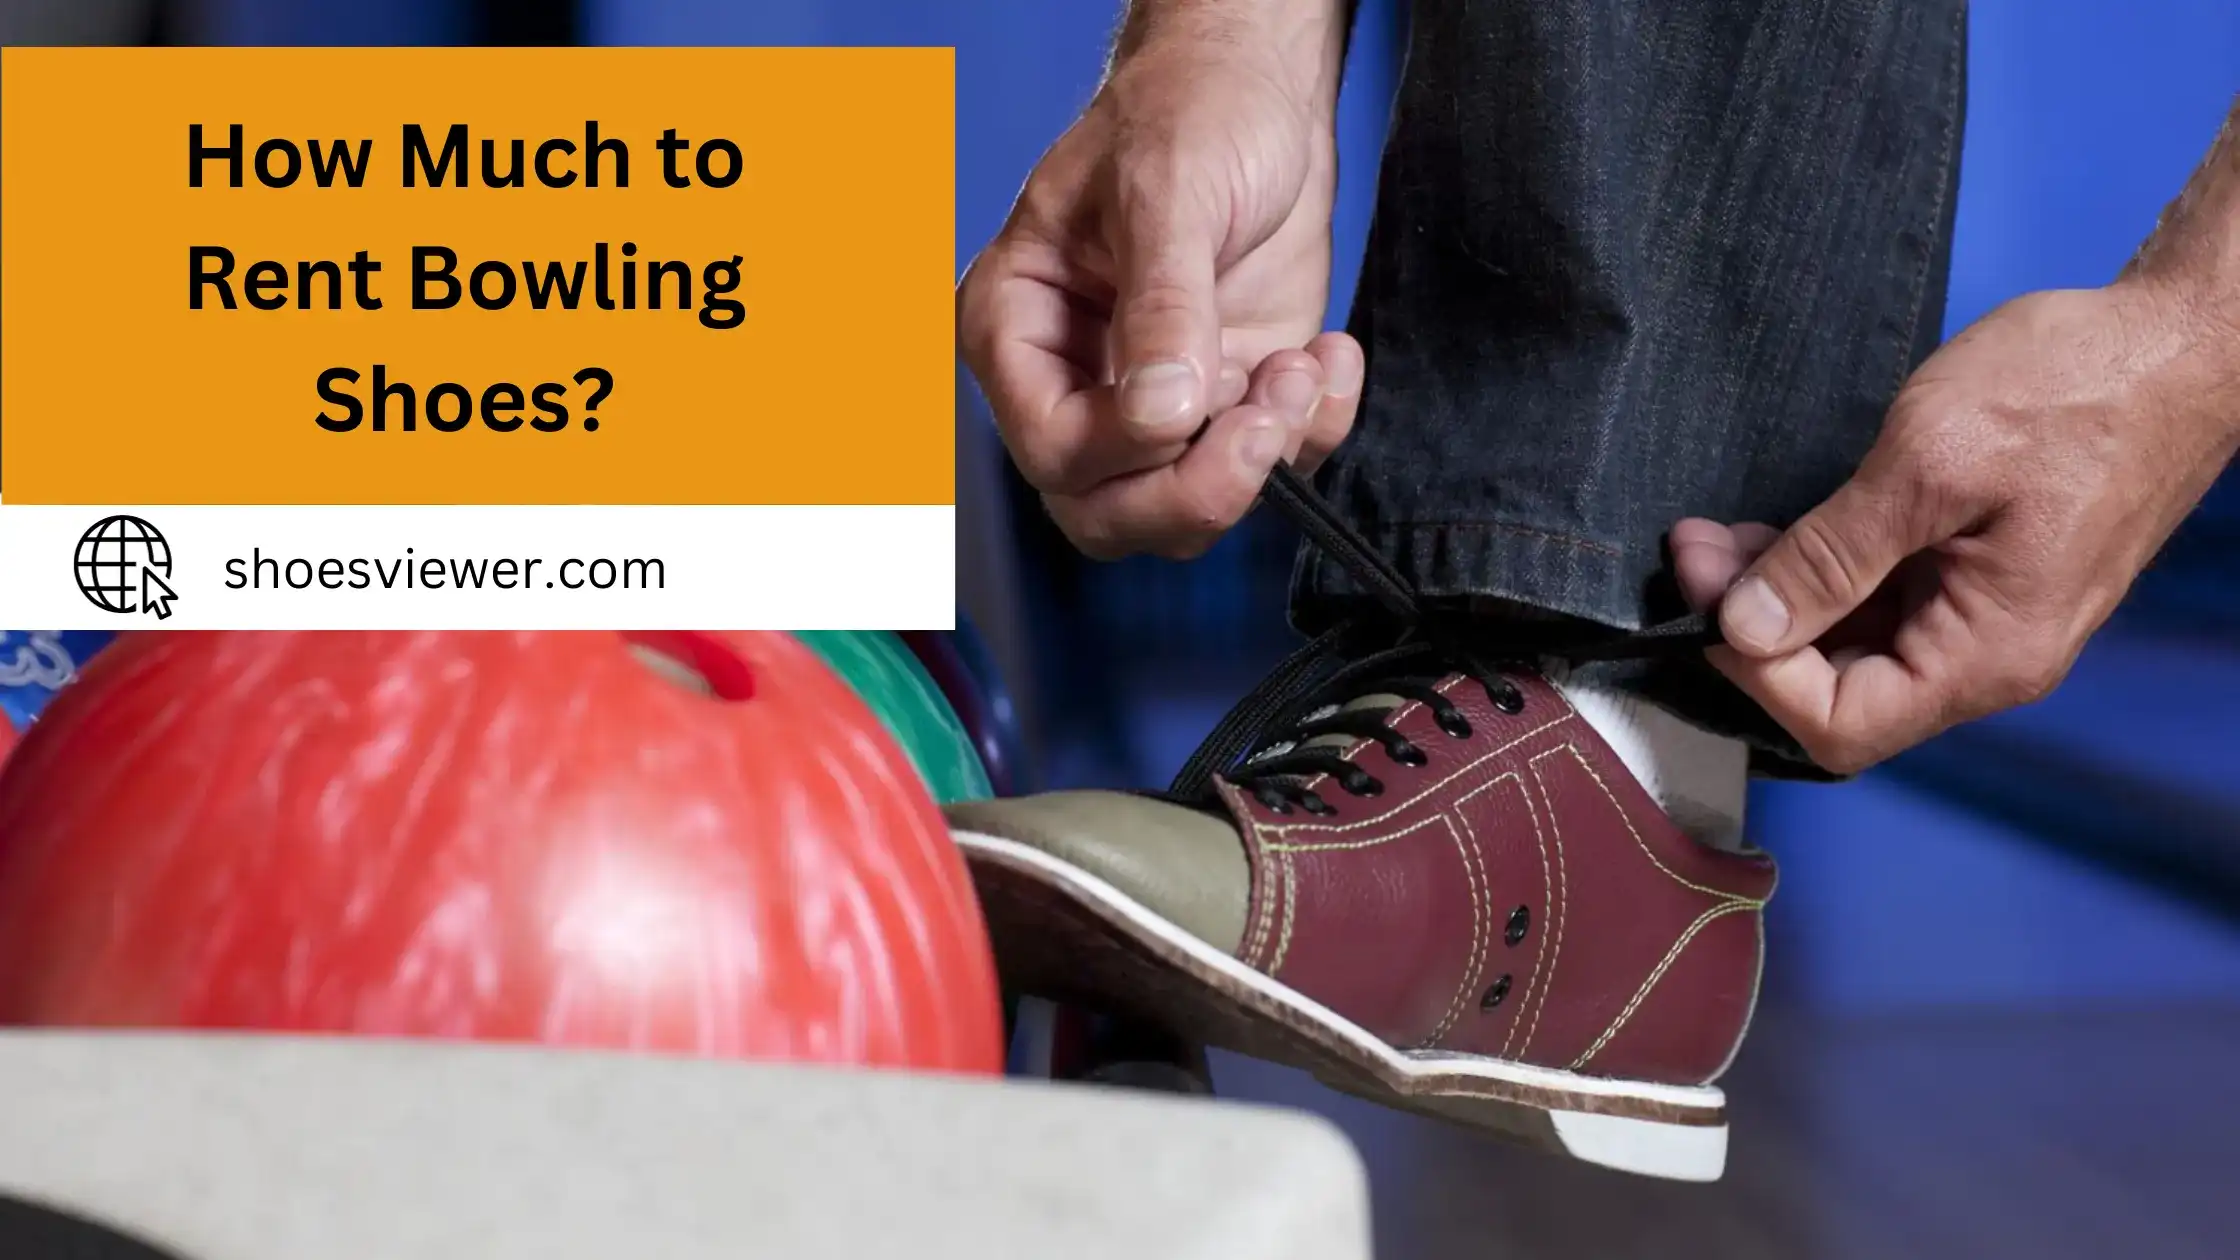 How Much to Rent Bowling Shoes? (An In-Depth Guide)